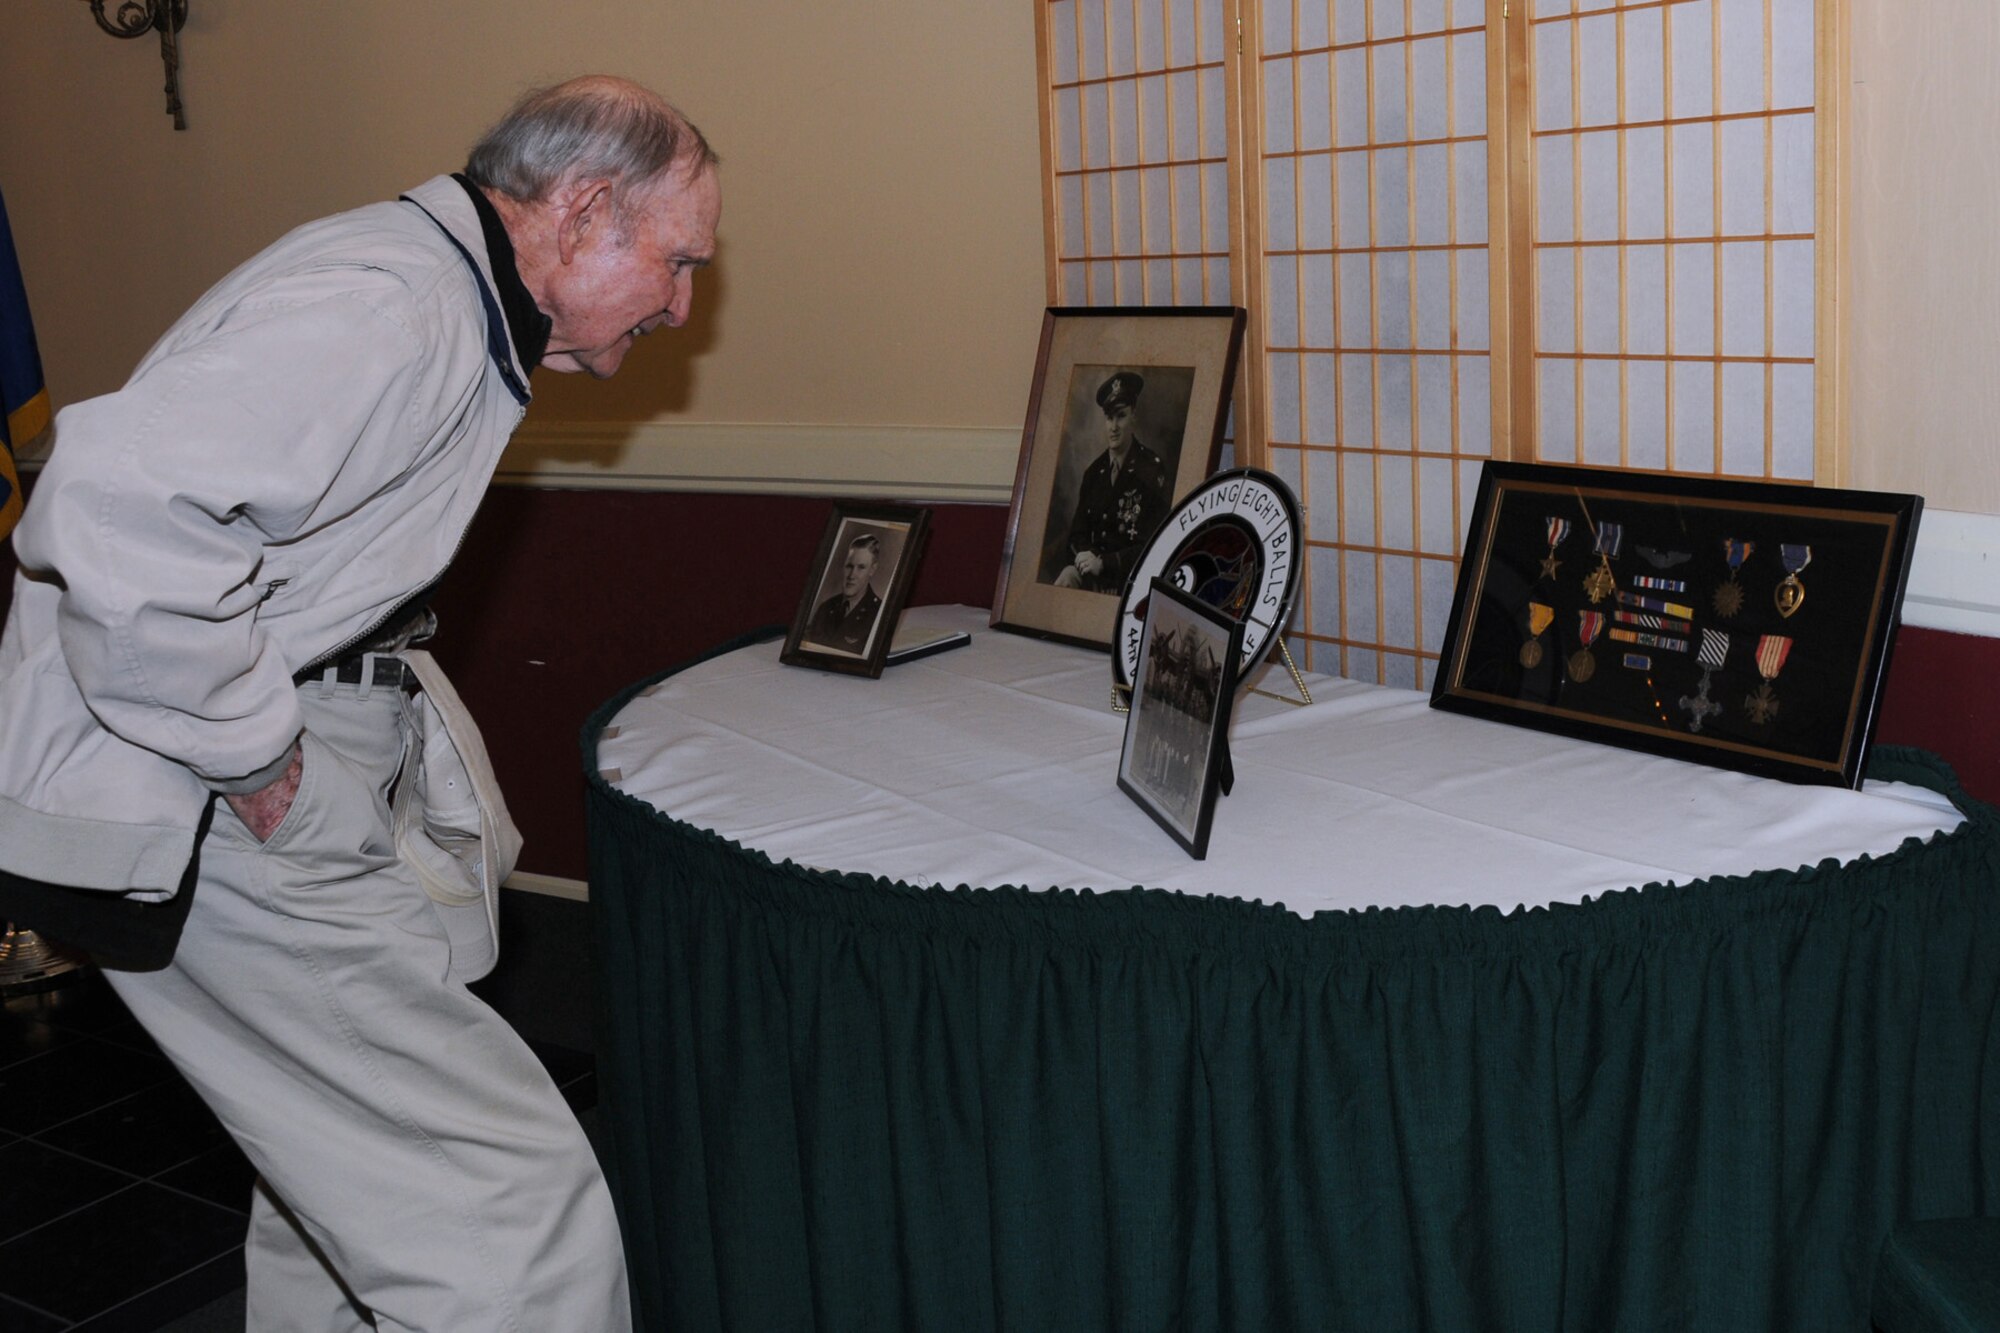 BARKSDALE AIR FORCE BASE, La. – A friend of Walter Holmes looks at some of the photos and decorations of Holmes. Holmes received the Distinguished Service Cross Monday, two days before his 90th birthday and 65 years after the Ploesti Oil Refinery raid where he was a lead pilot in a formation of B-24 Liberators. The raid was conducted on Aug. 1, 1943. (U.S. Air Force photo by TSgt. M. Erick Reynolds)